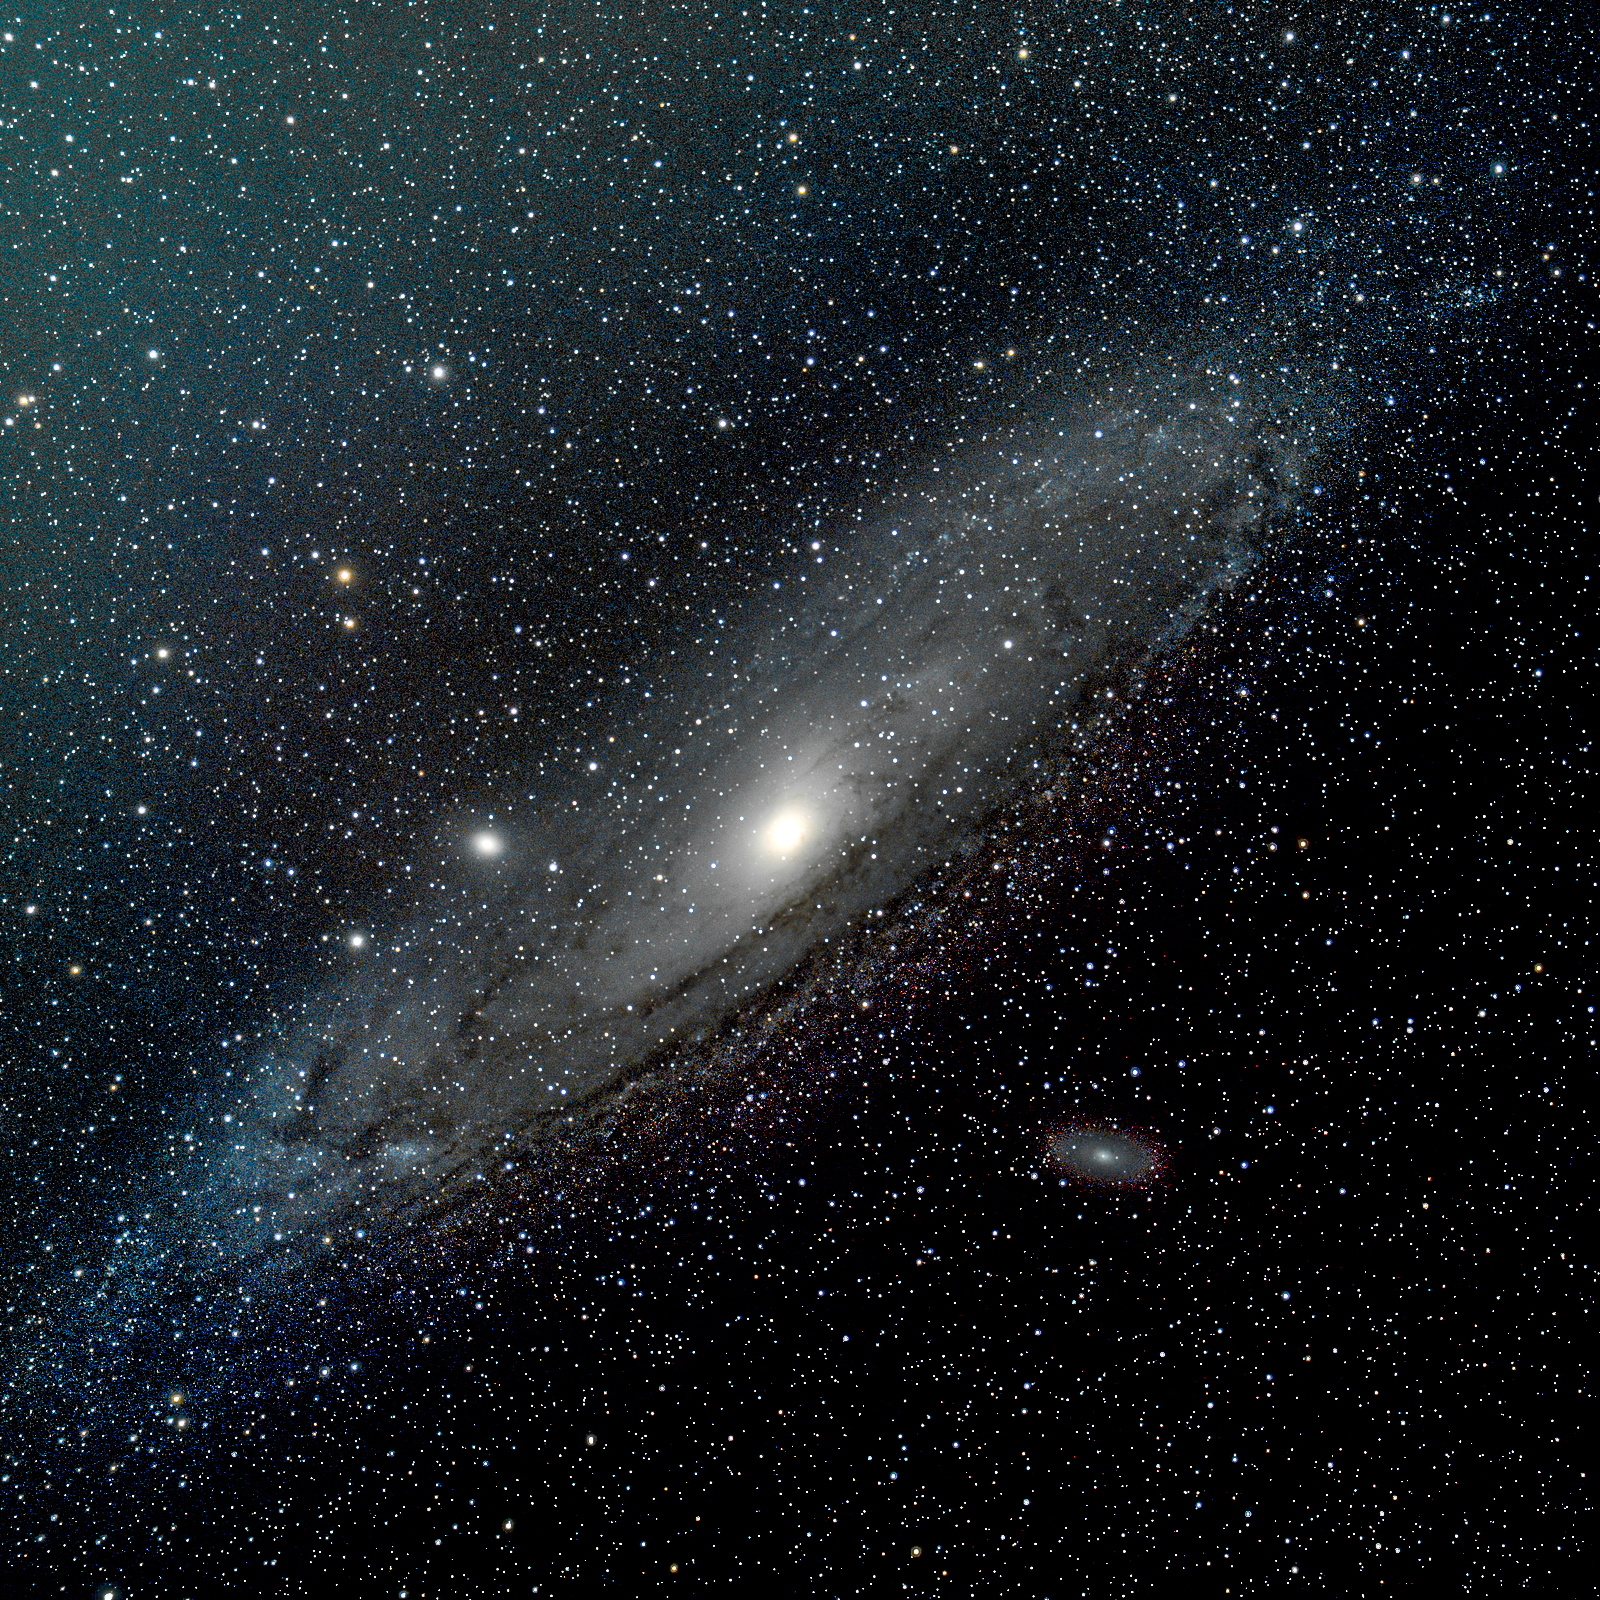 m31 with some tweeks